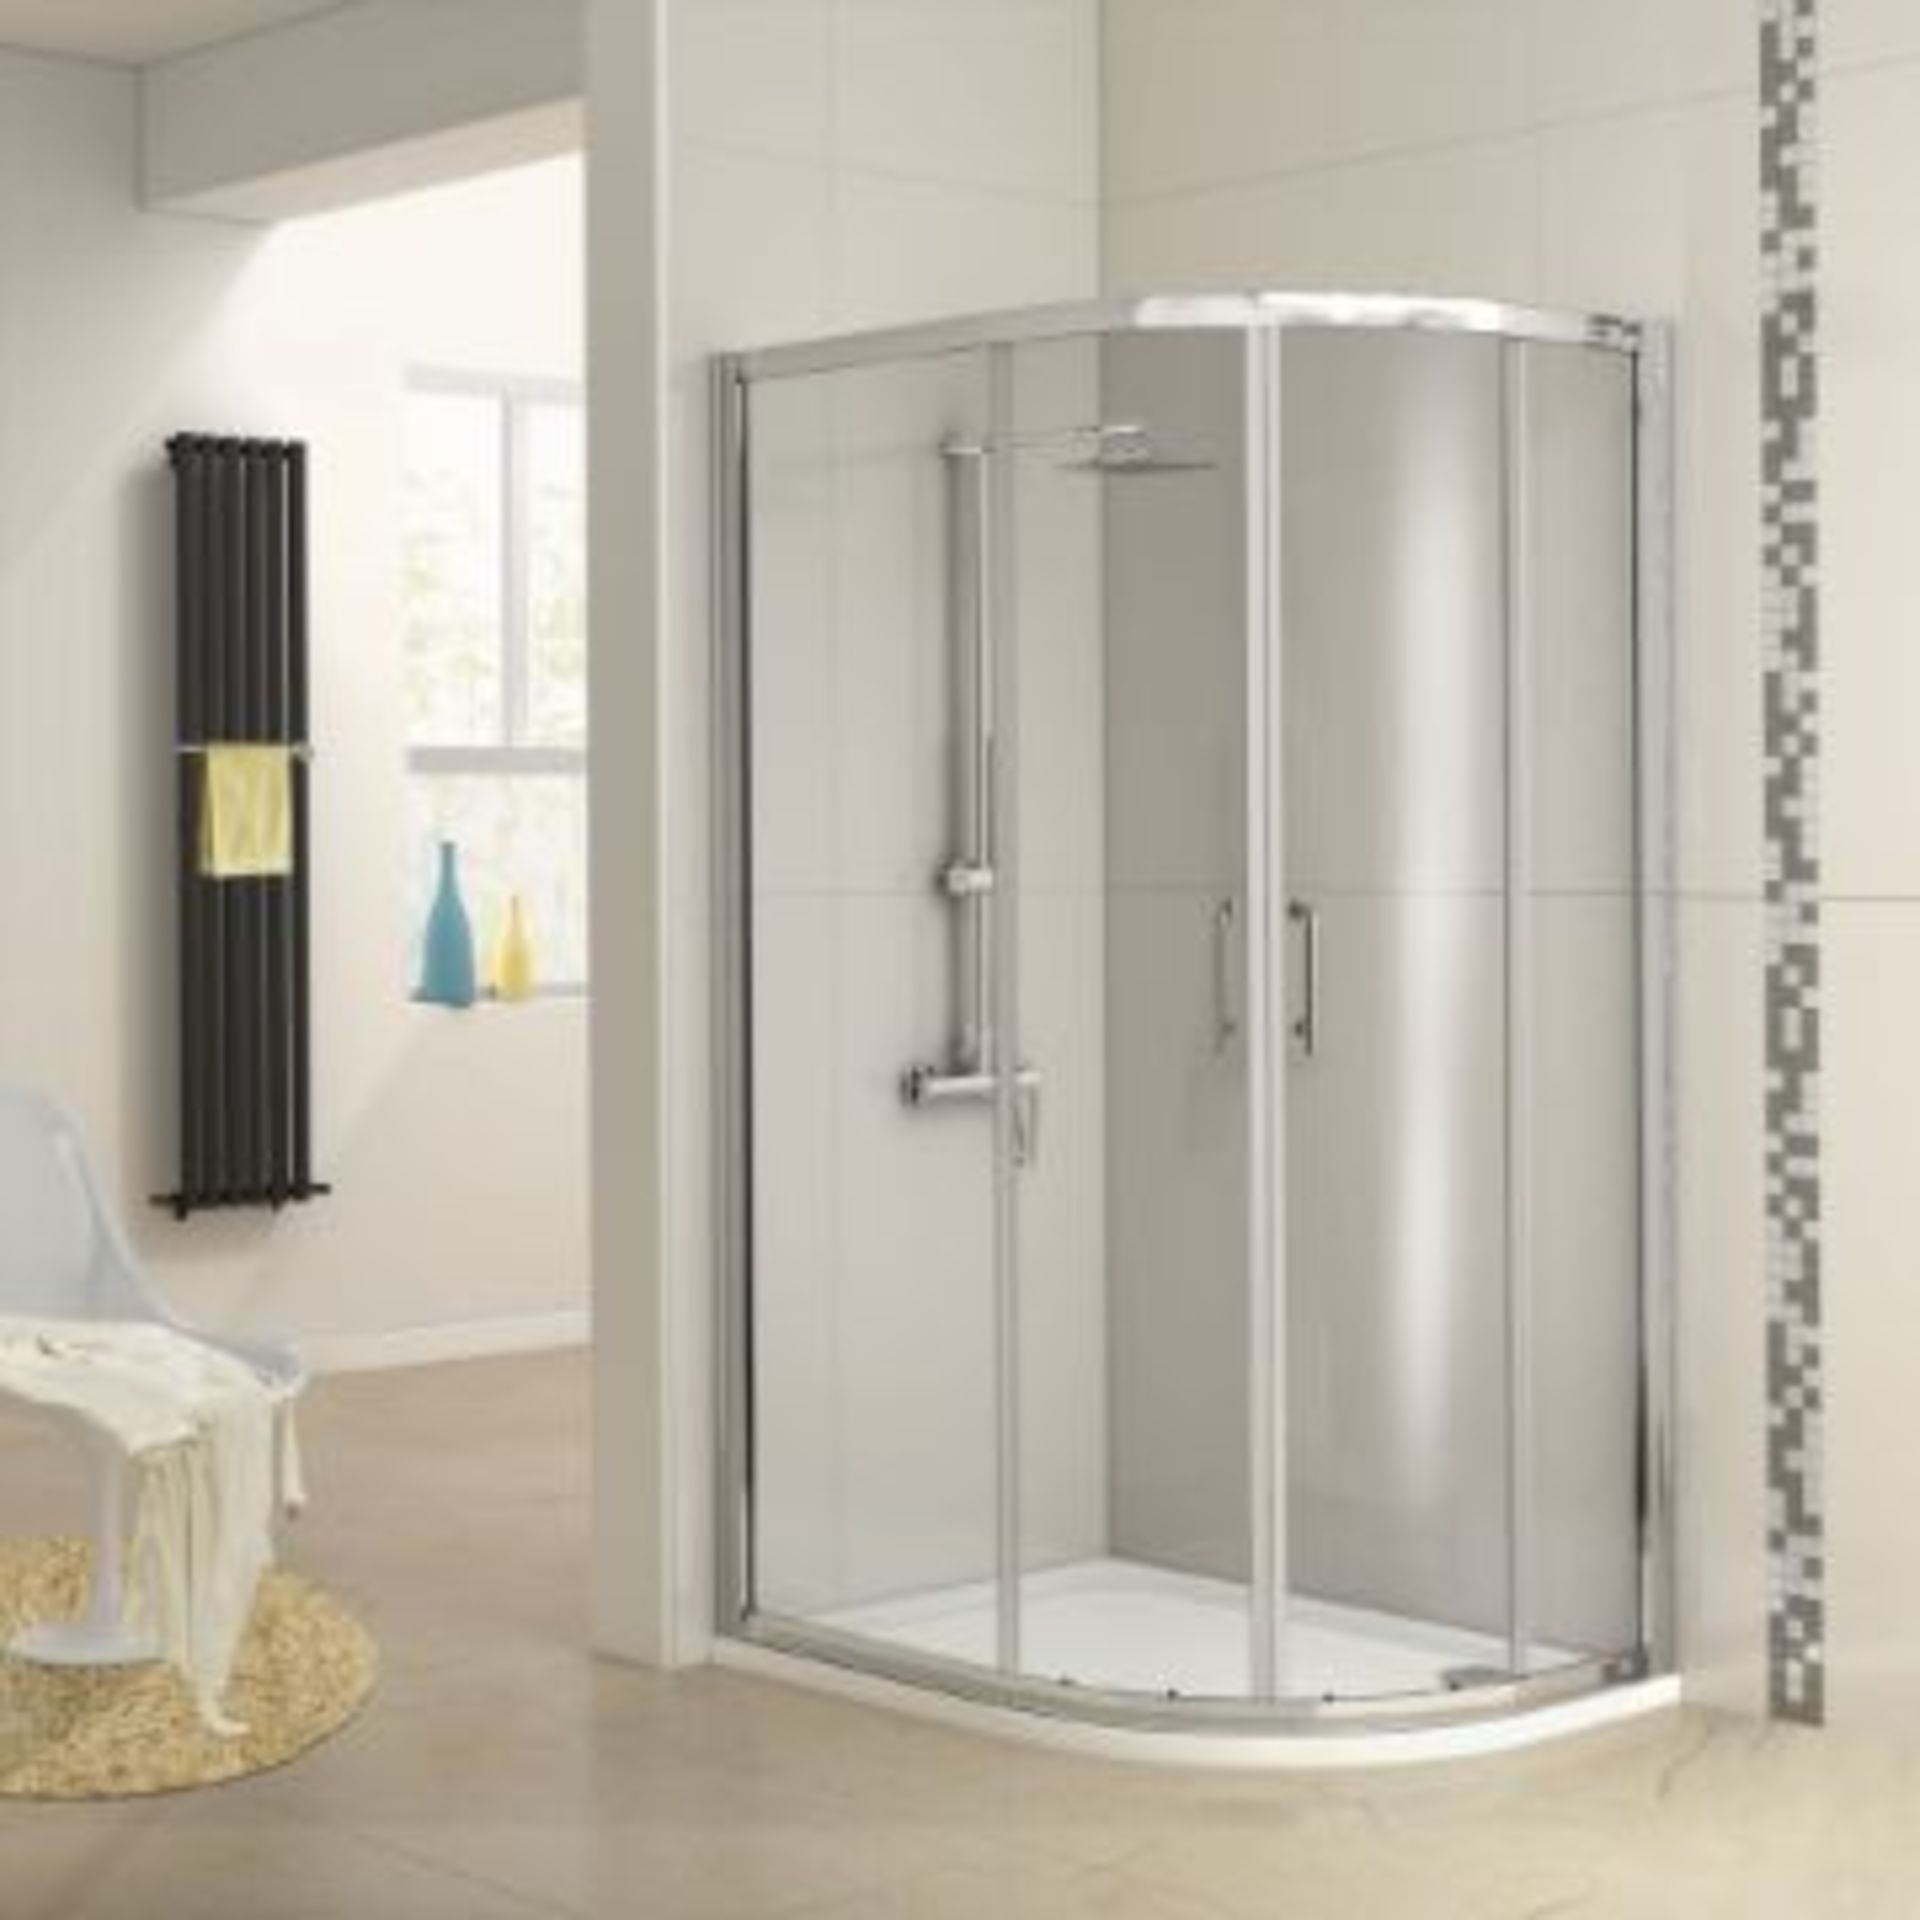 New (T69) The Twyford 1200 x 800mm Offset Quadrant Shower Enclosure Uses The Innovative Click L... - Image 2 of 2